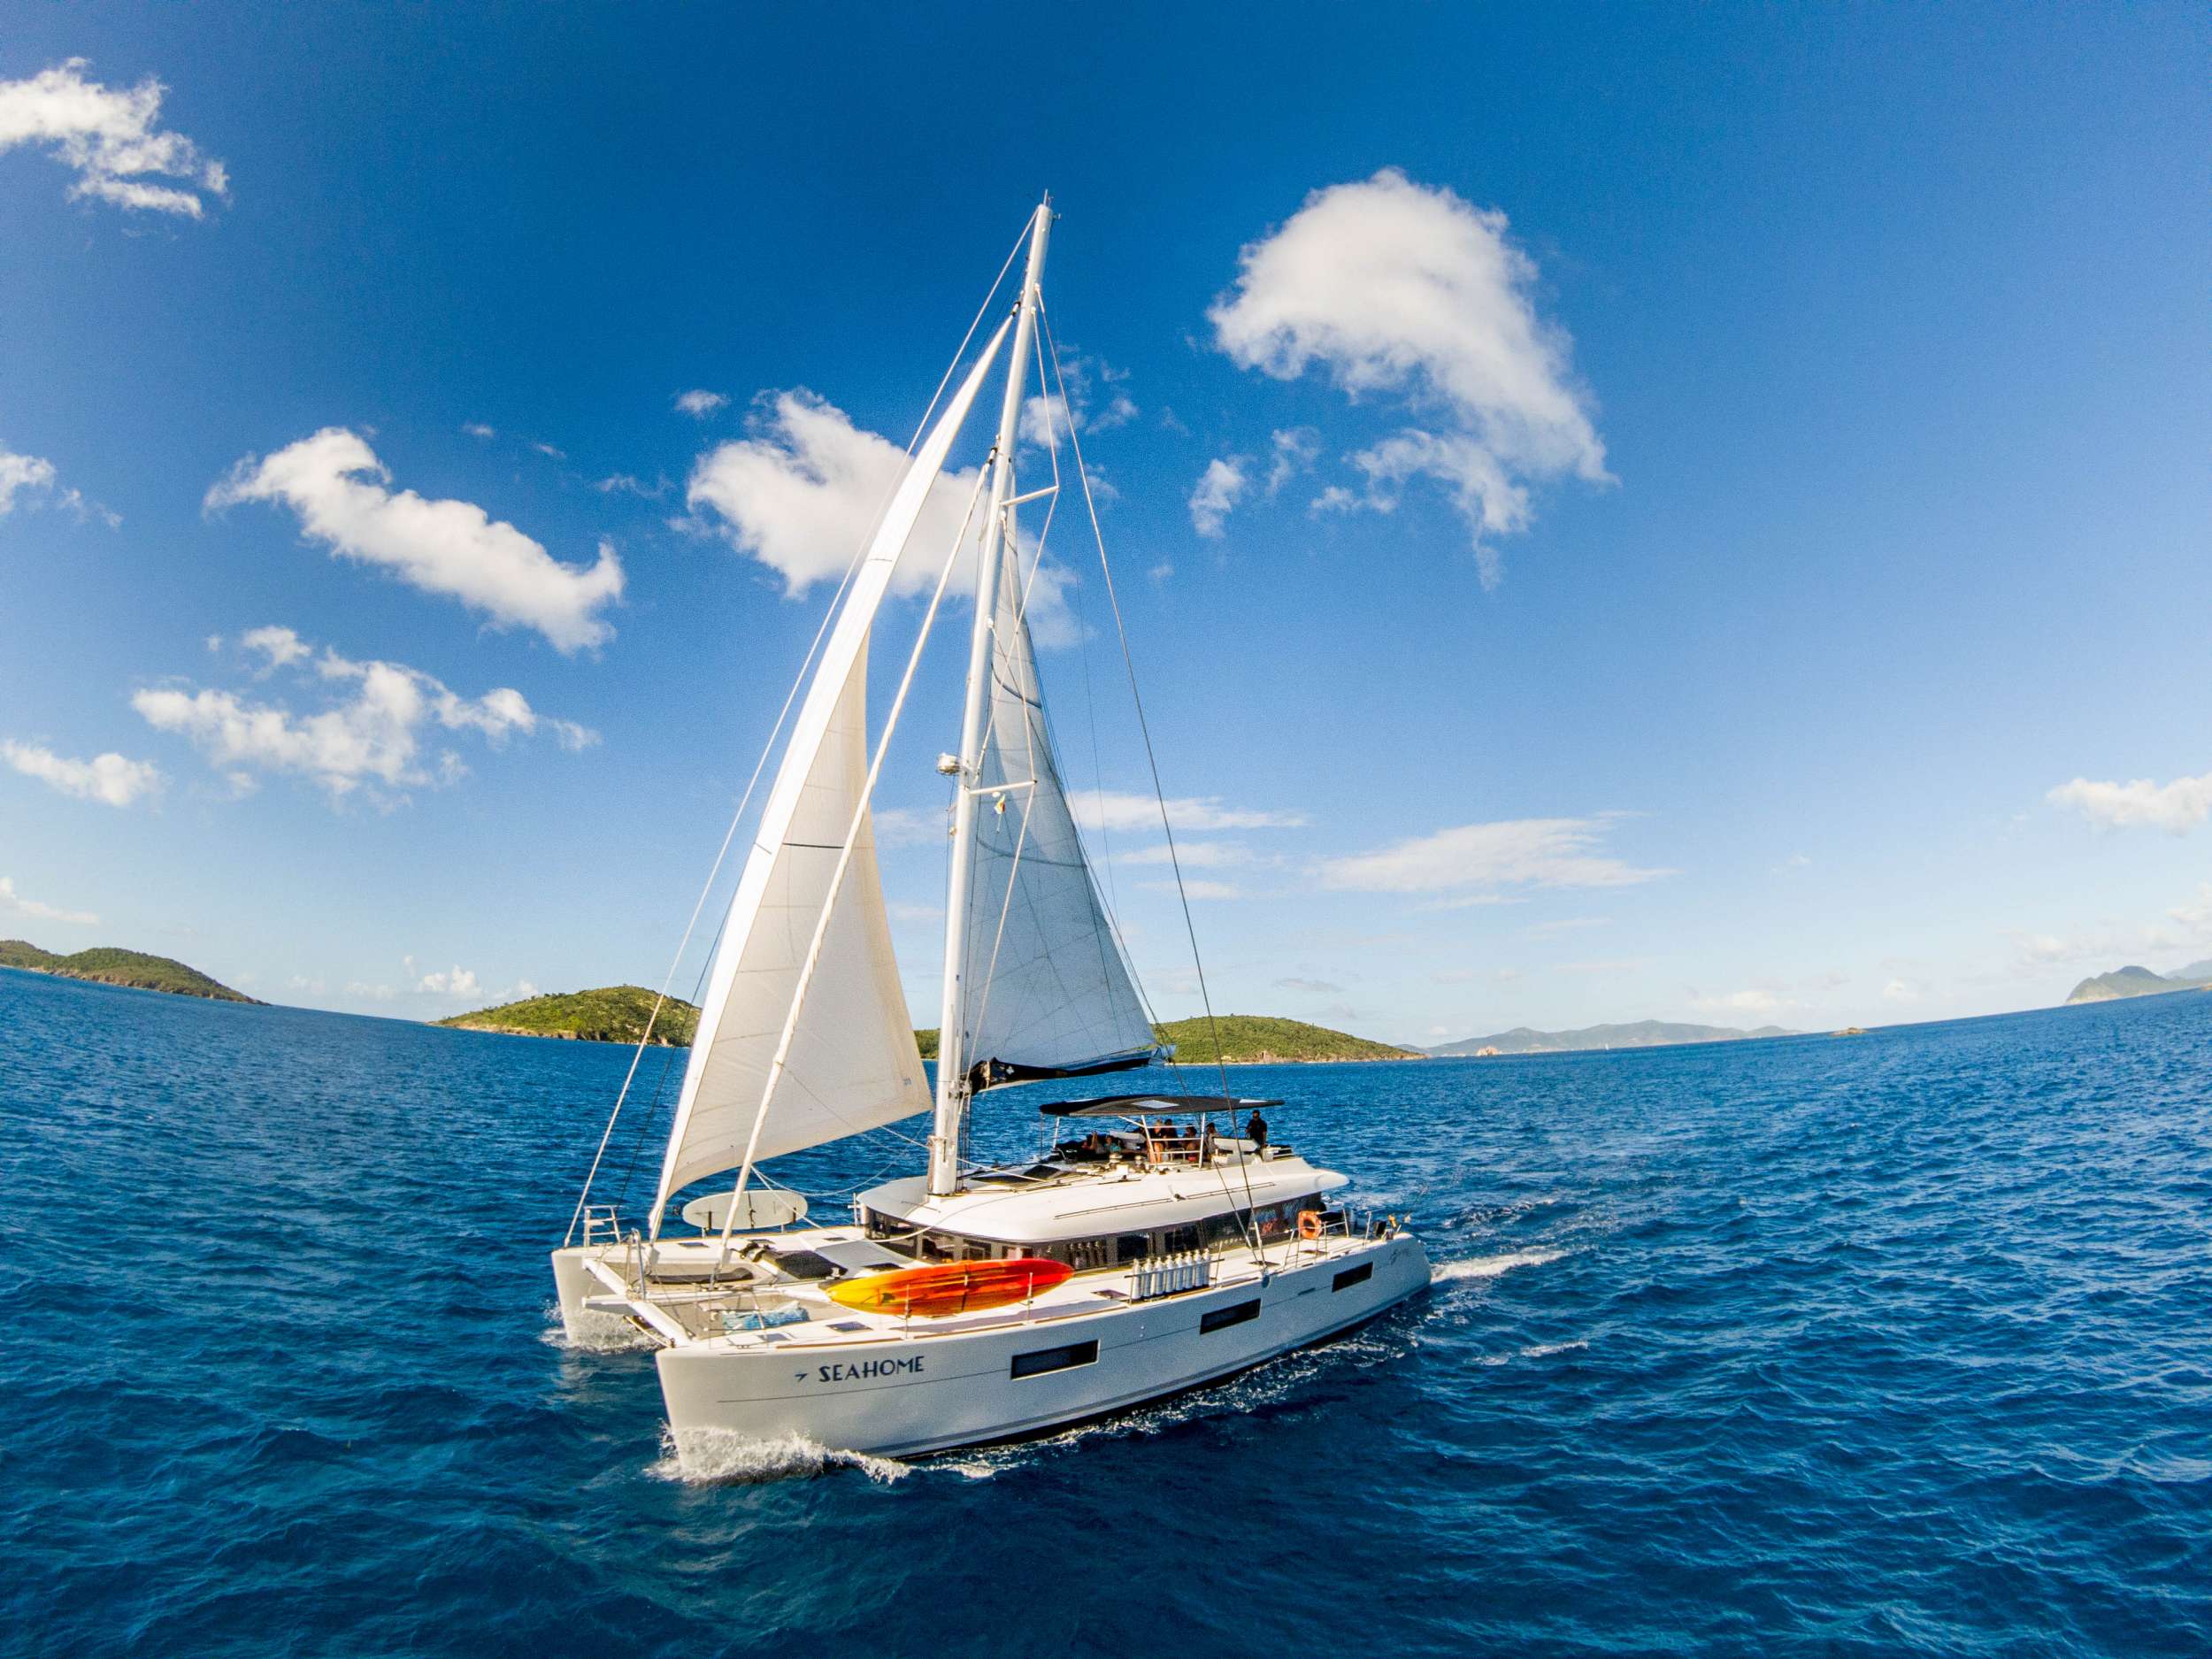 seahome - Luxury yacht charter St Lucia & Boat hire in Caribbean 1